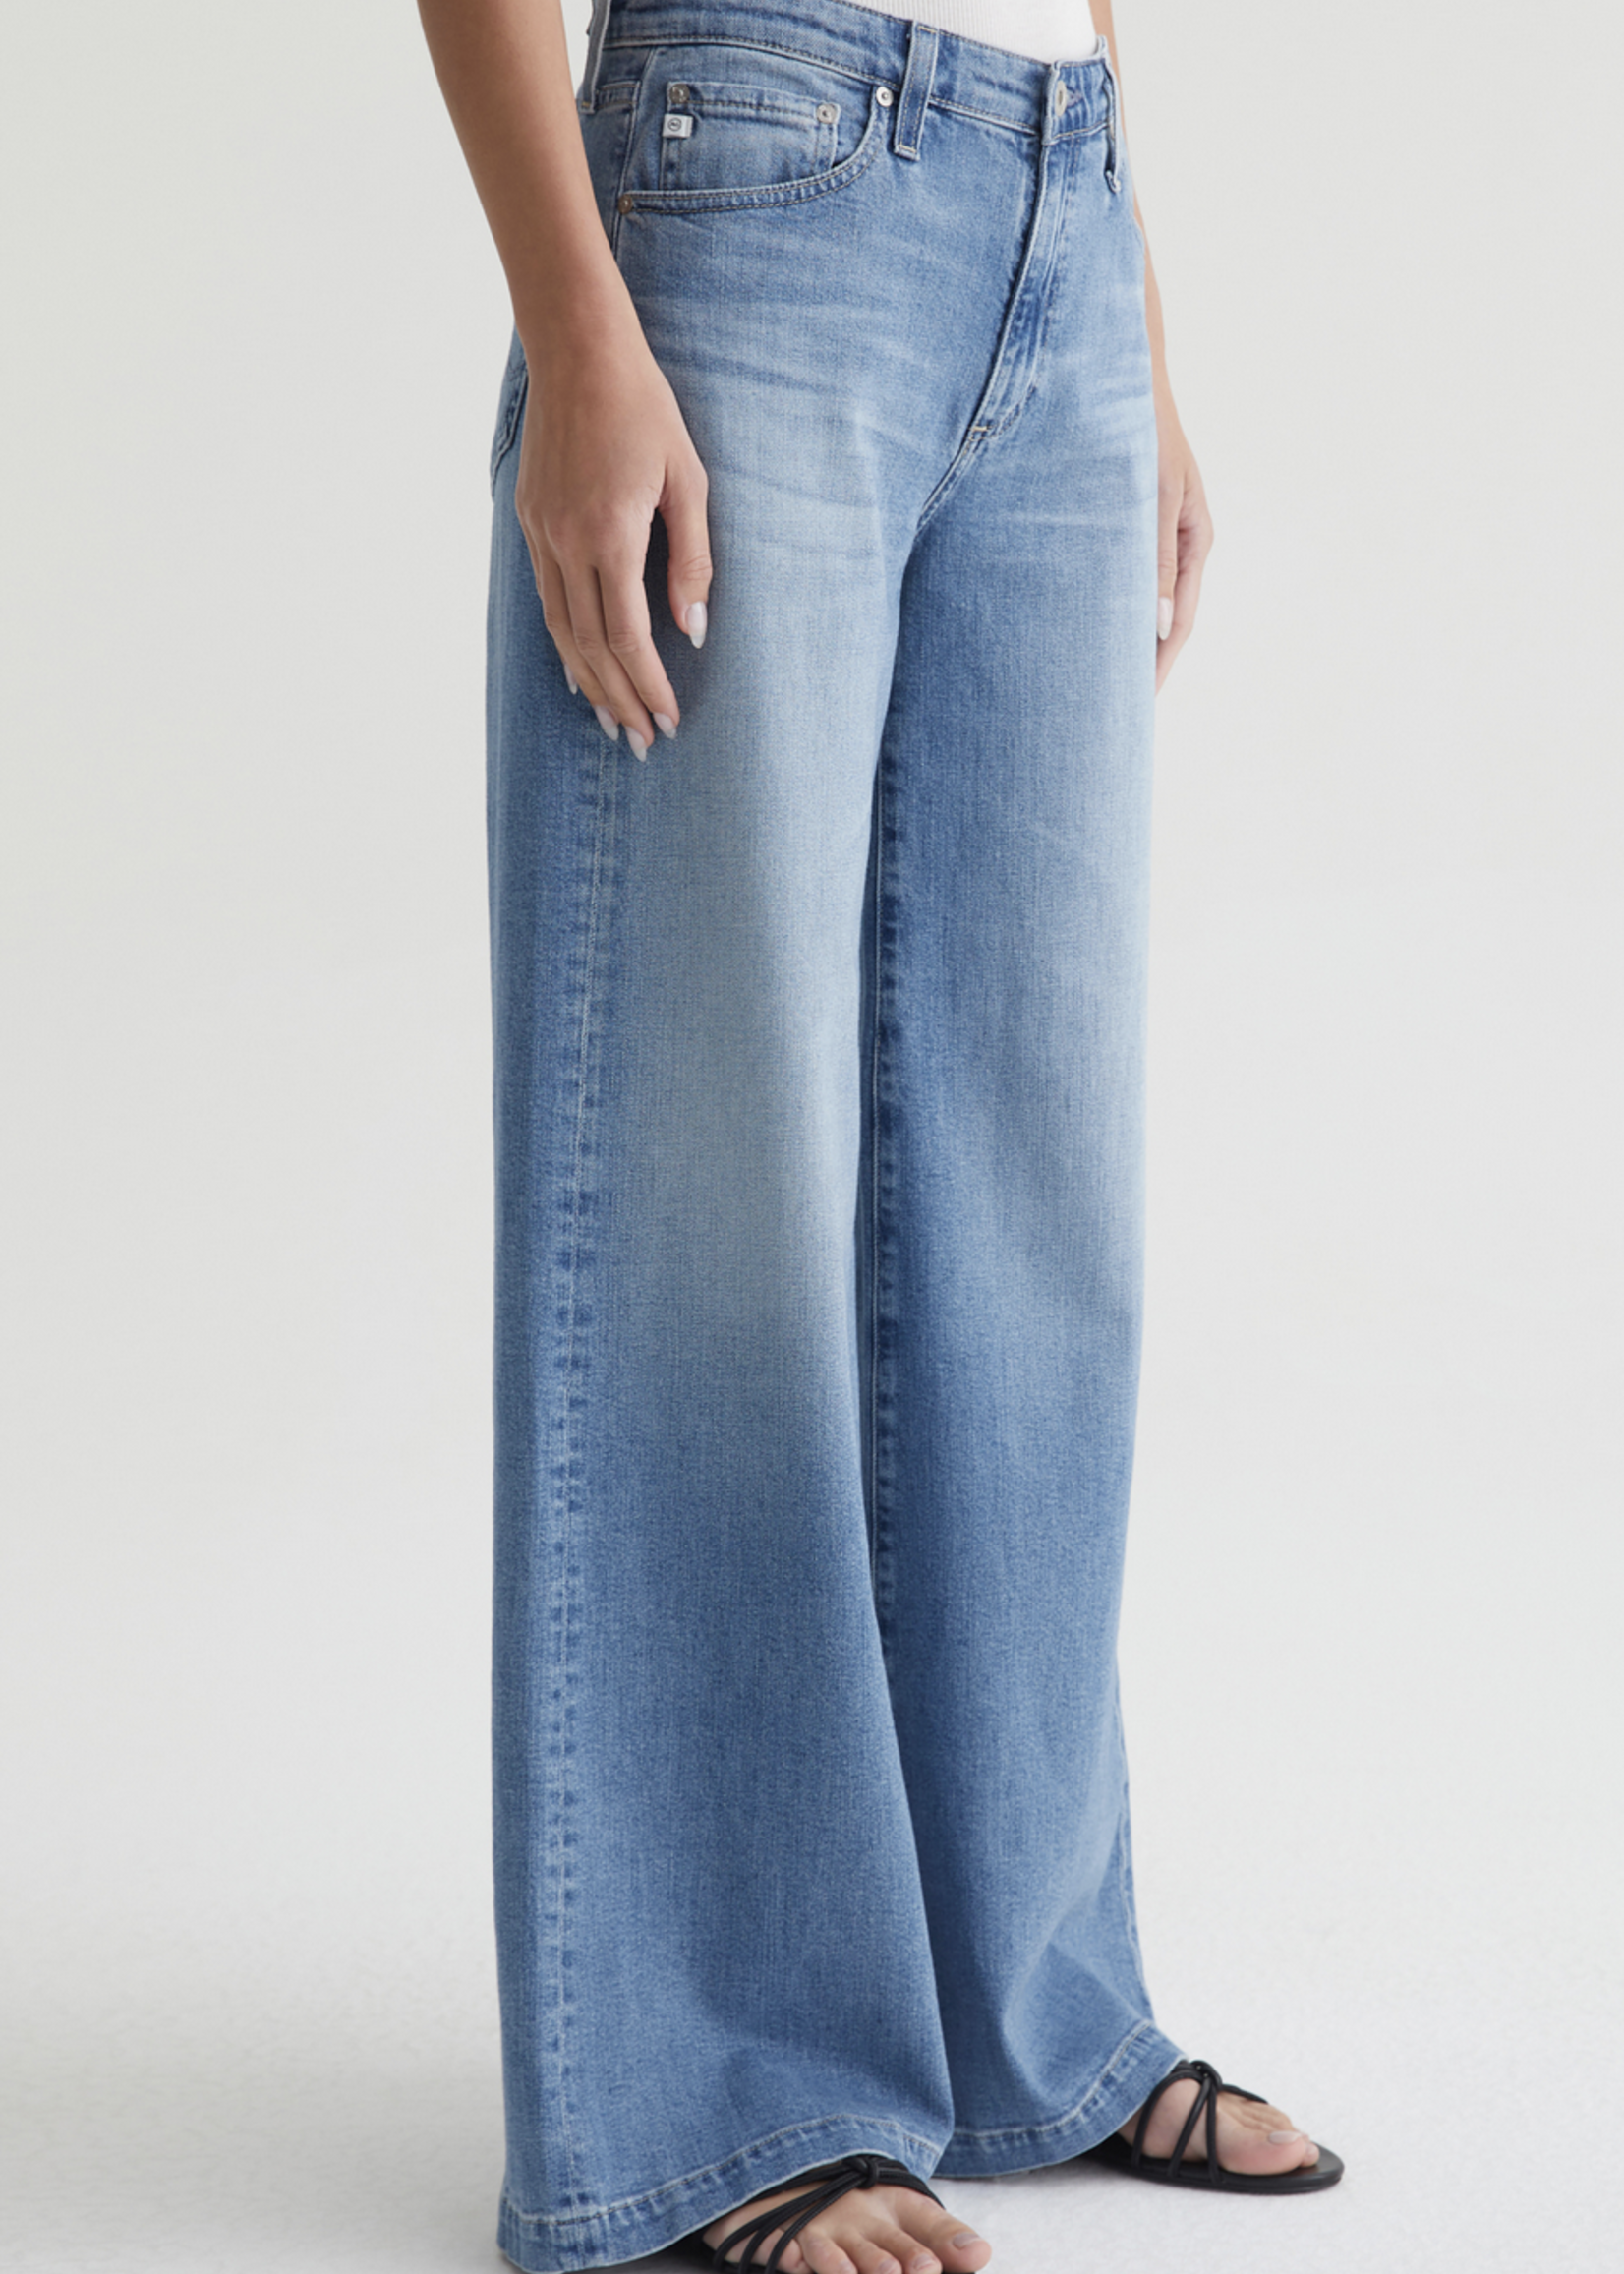 AG JEANS LEANA MID RISE PALAZZO JEAN